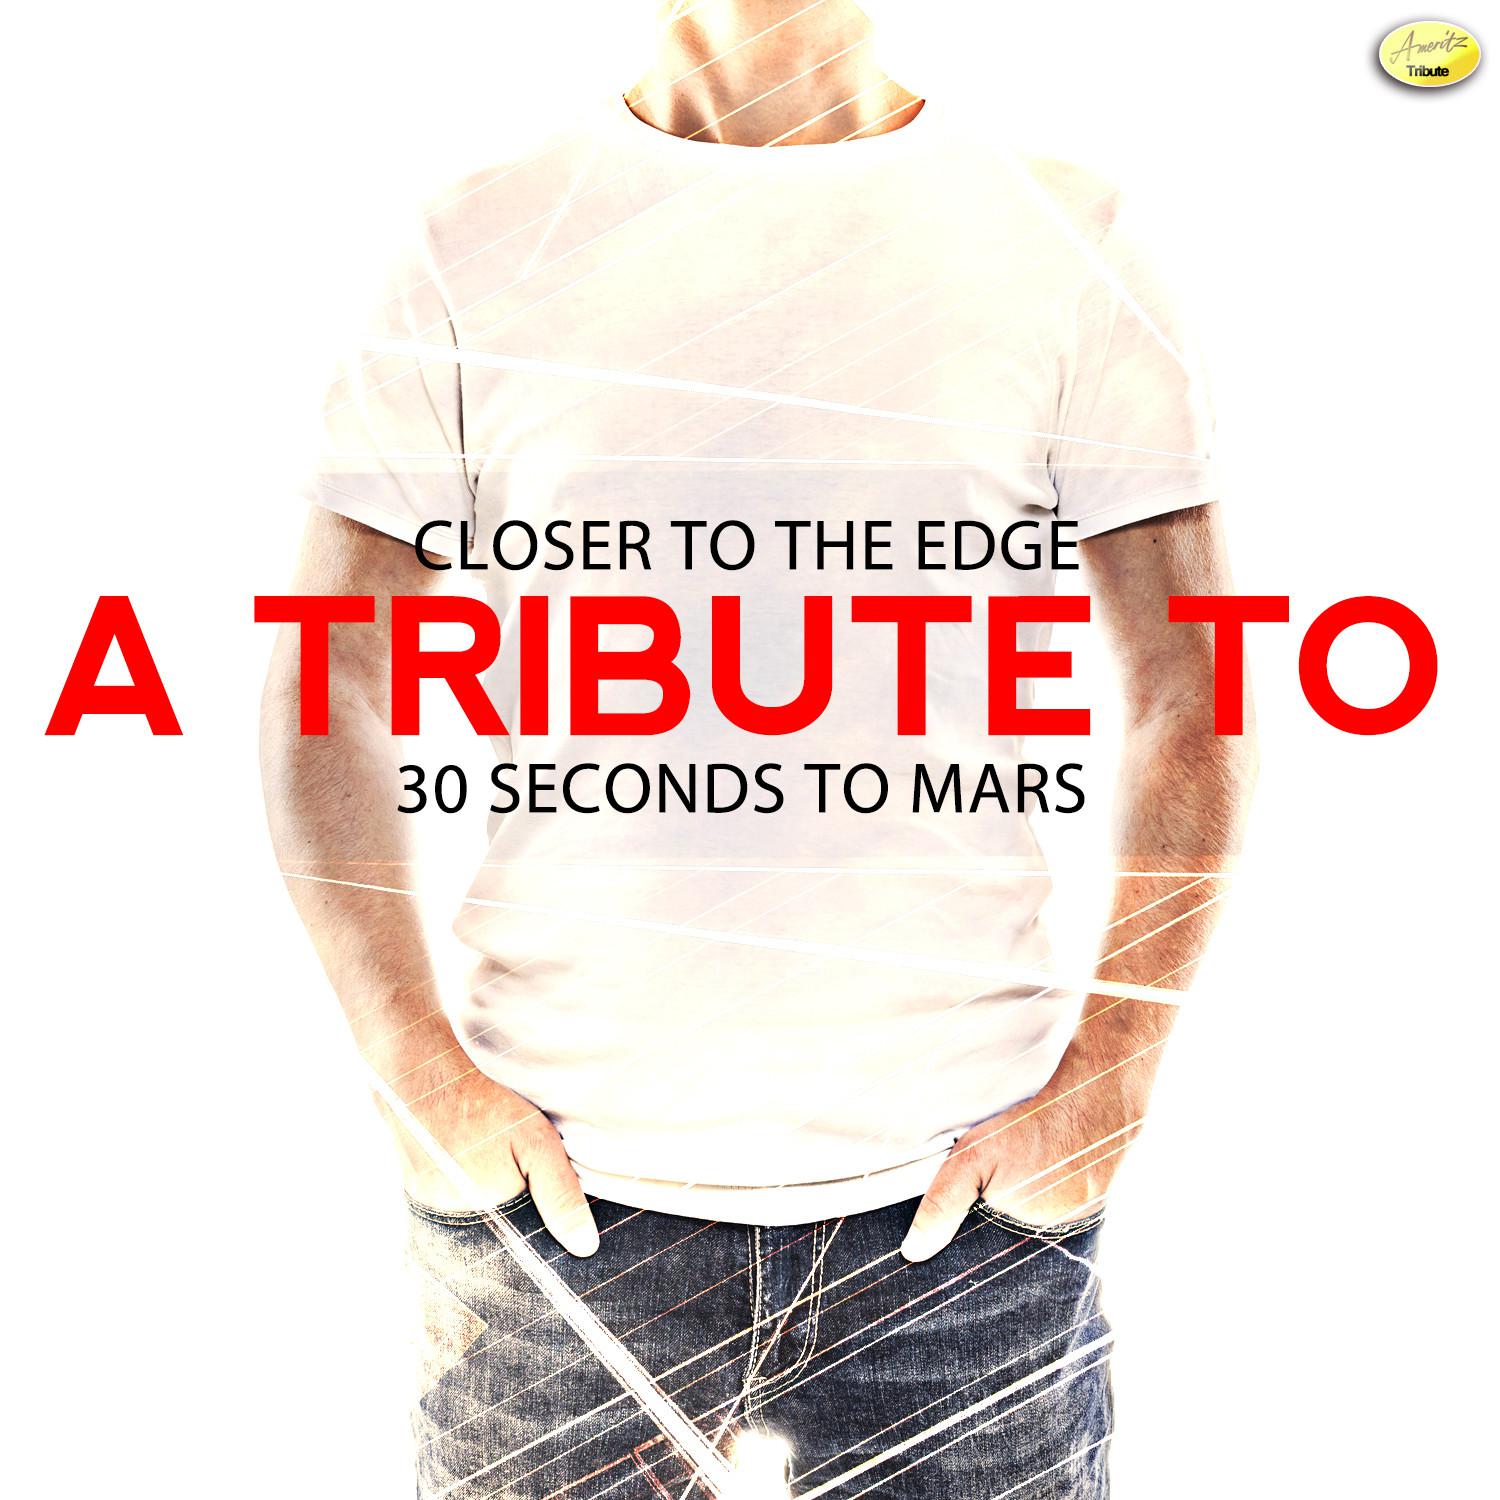 Closer to the Edge - A Tribute to 30 Seconds to Mars